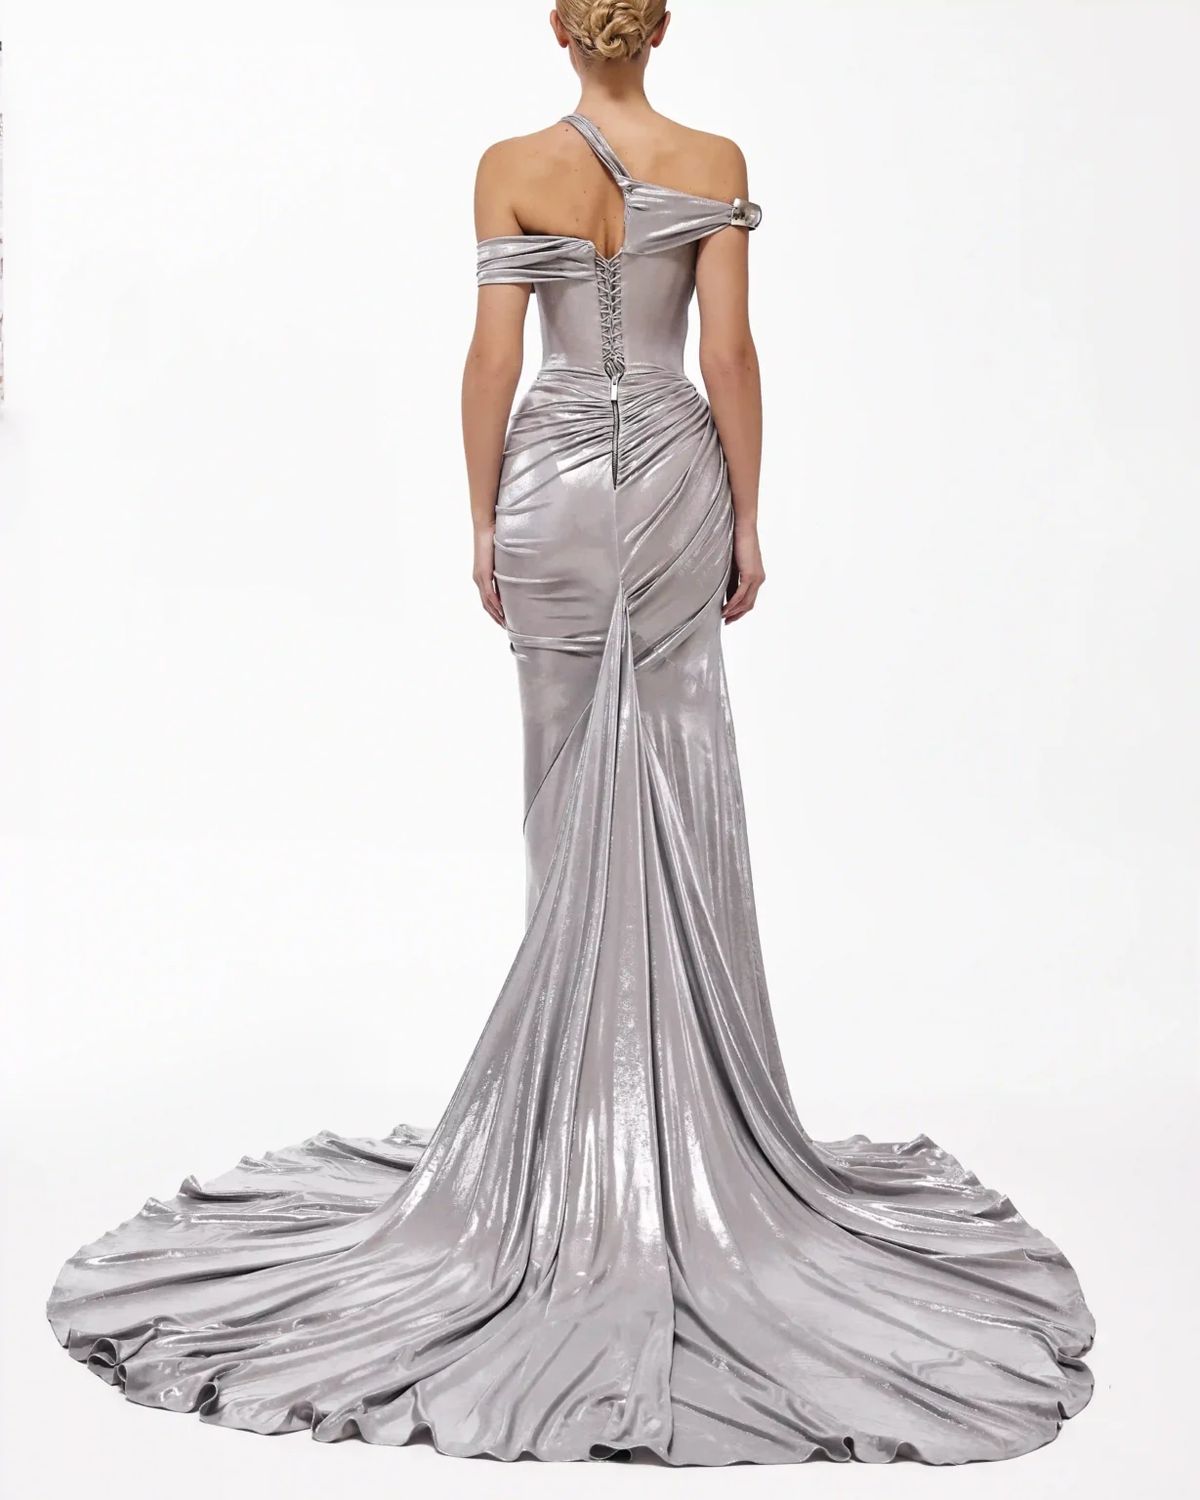 Style metallic-majesty-24-3 Valdrin Sahiti Size XS Pageant Silver Side Slit Dress on Queenly